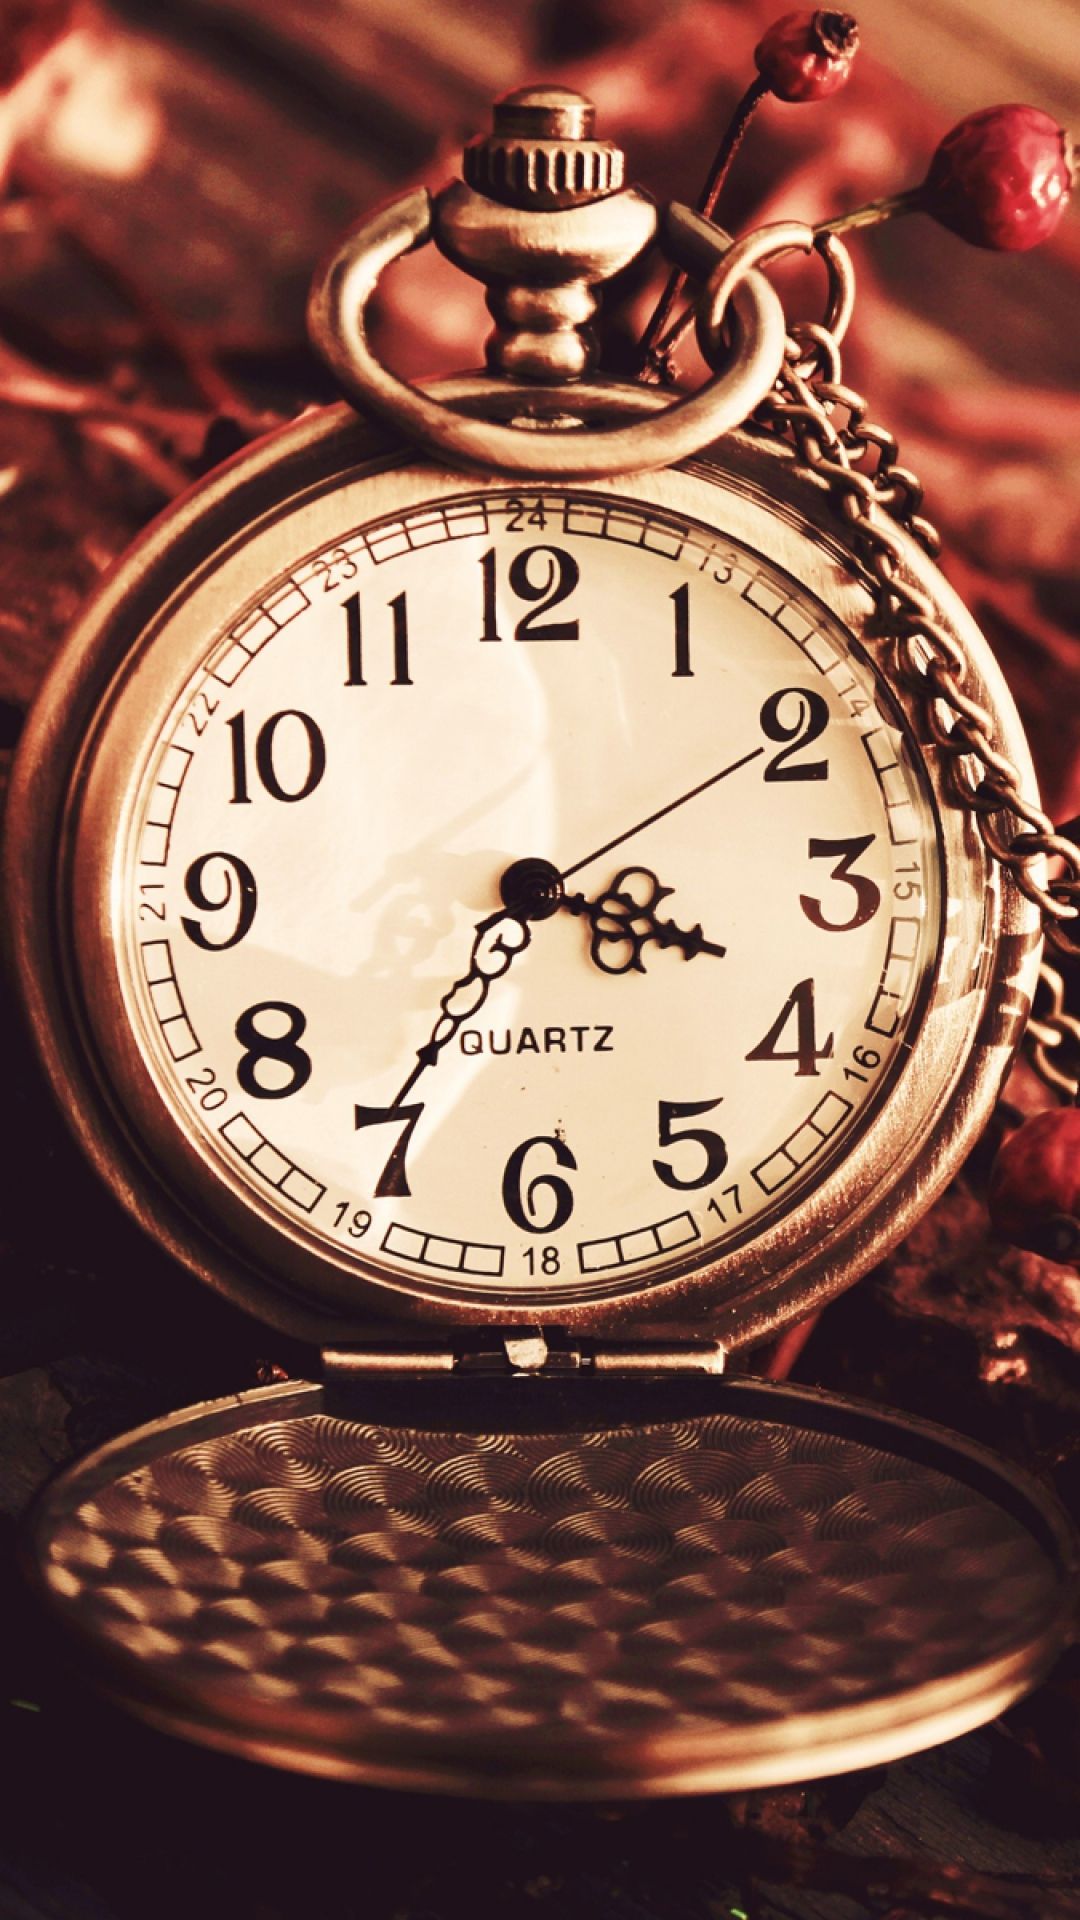 Antique Watch Wallpapers